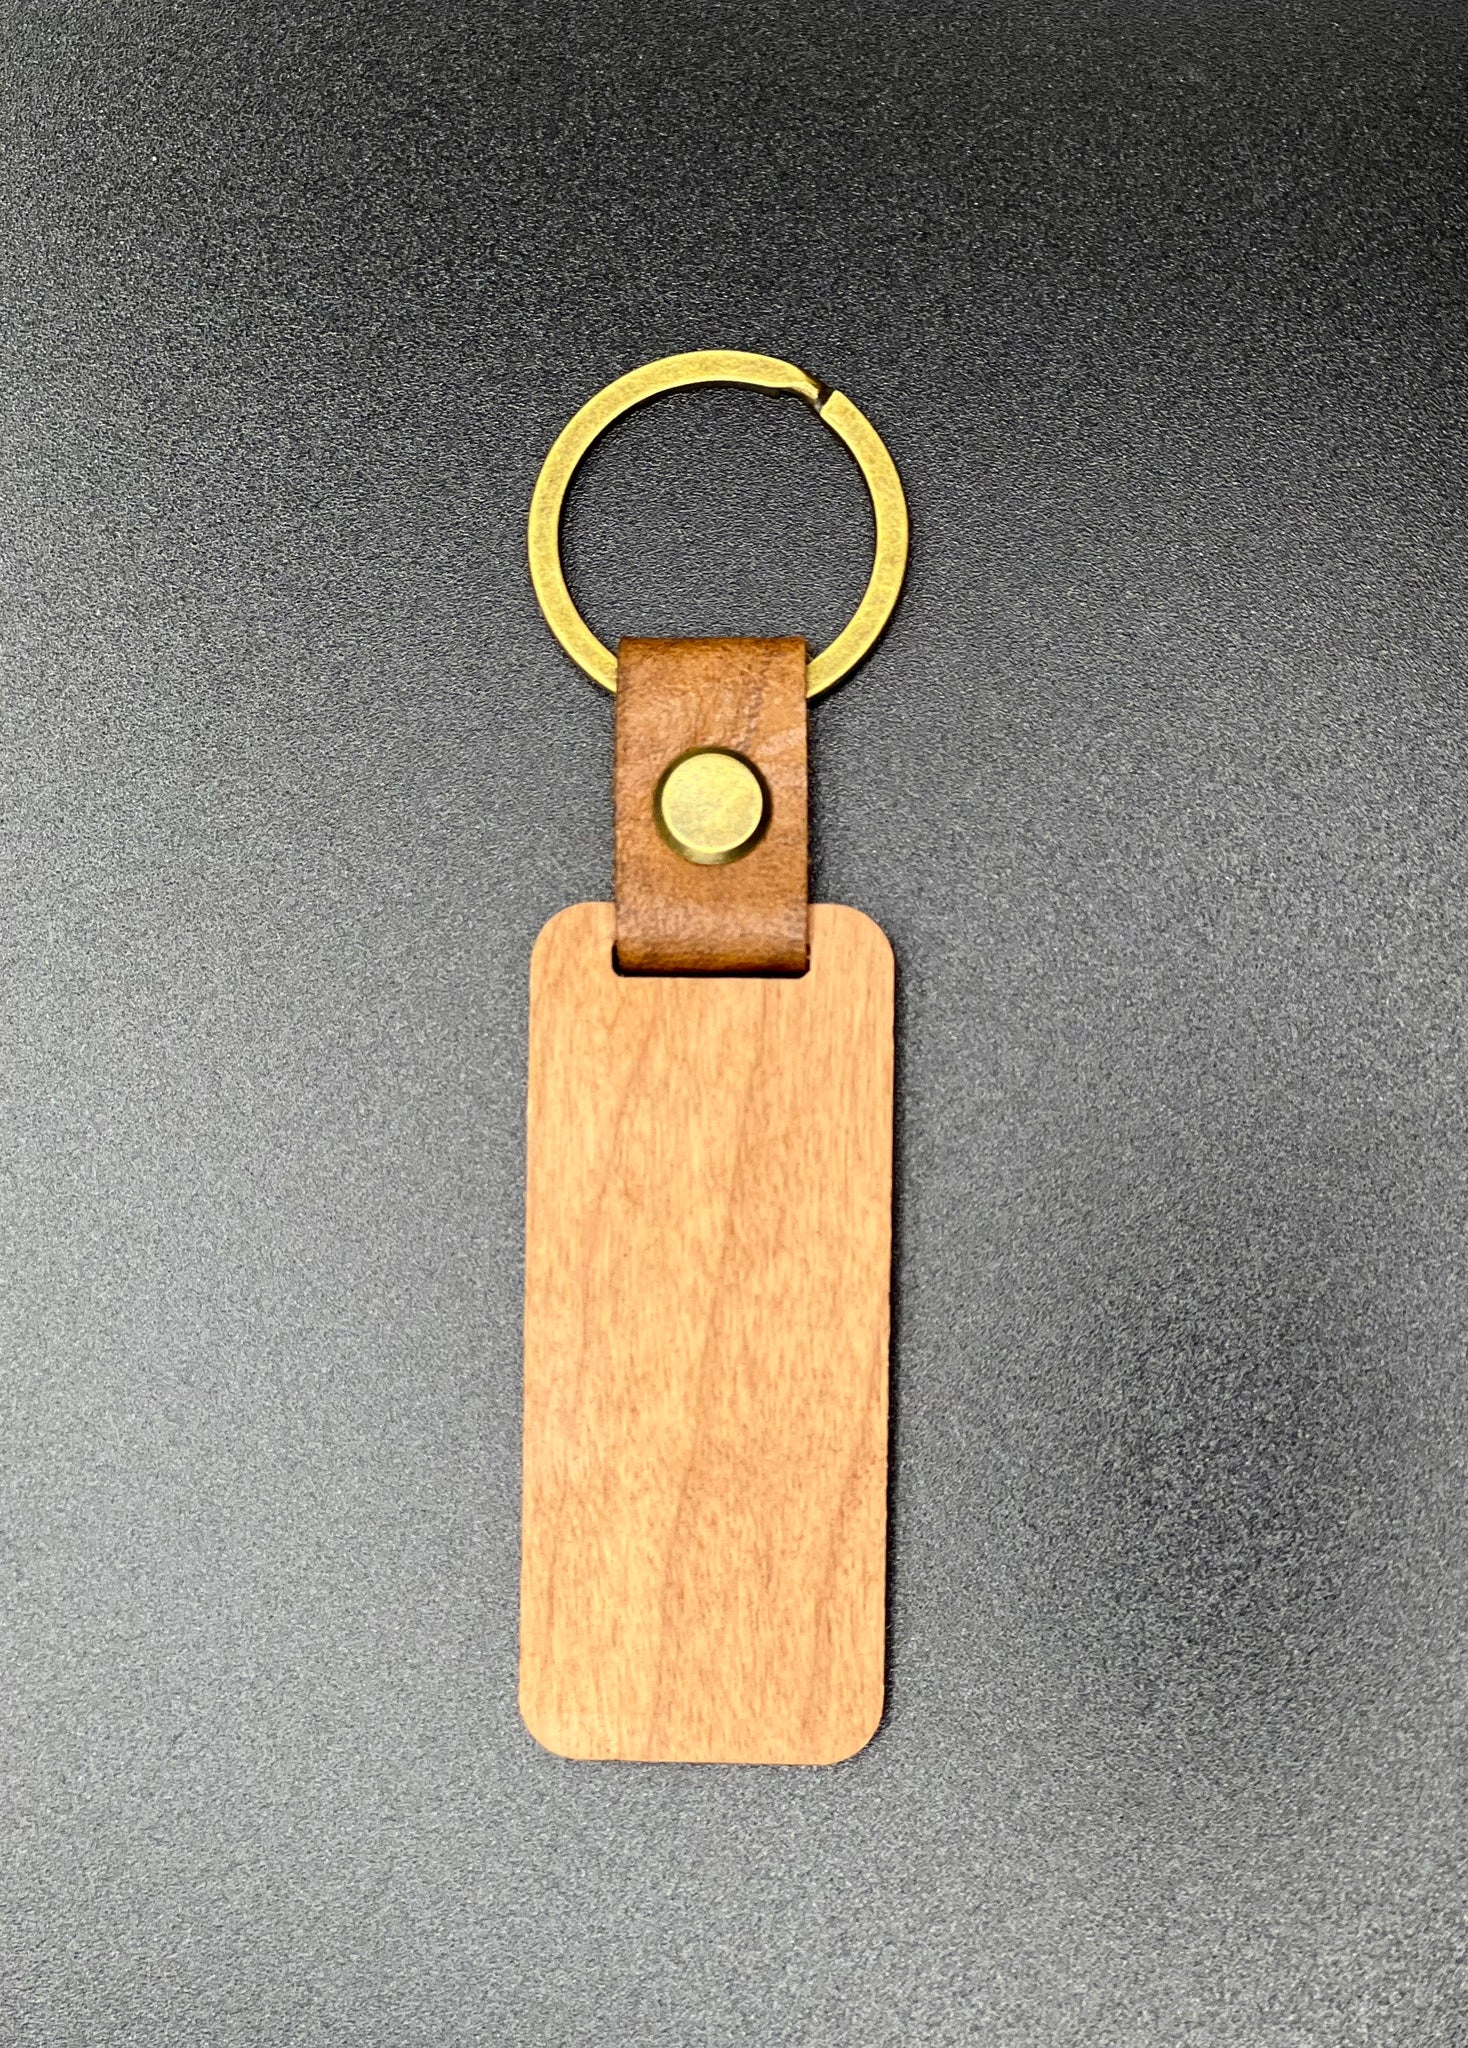 Pack of 20 Engraved Cherry Wood Keychains ($6.50 Each)